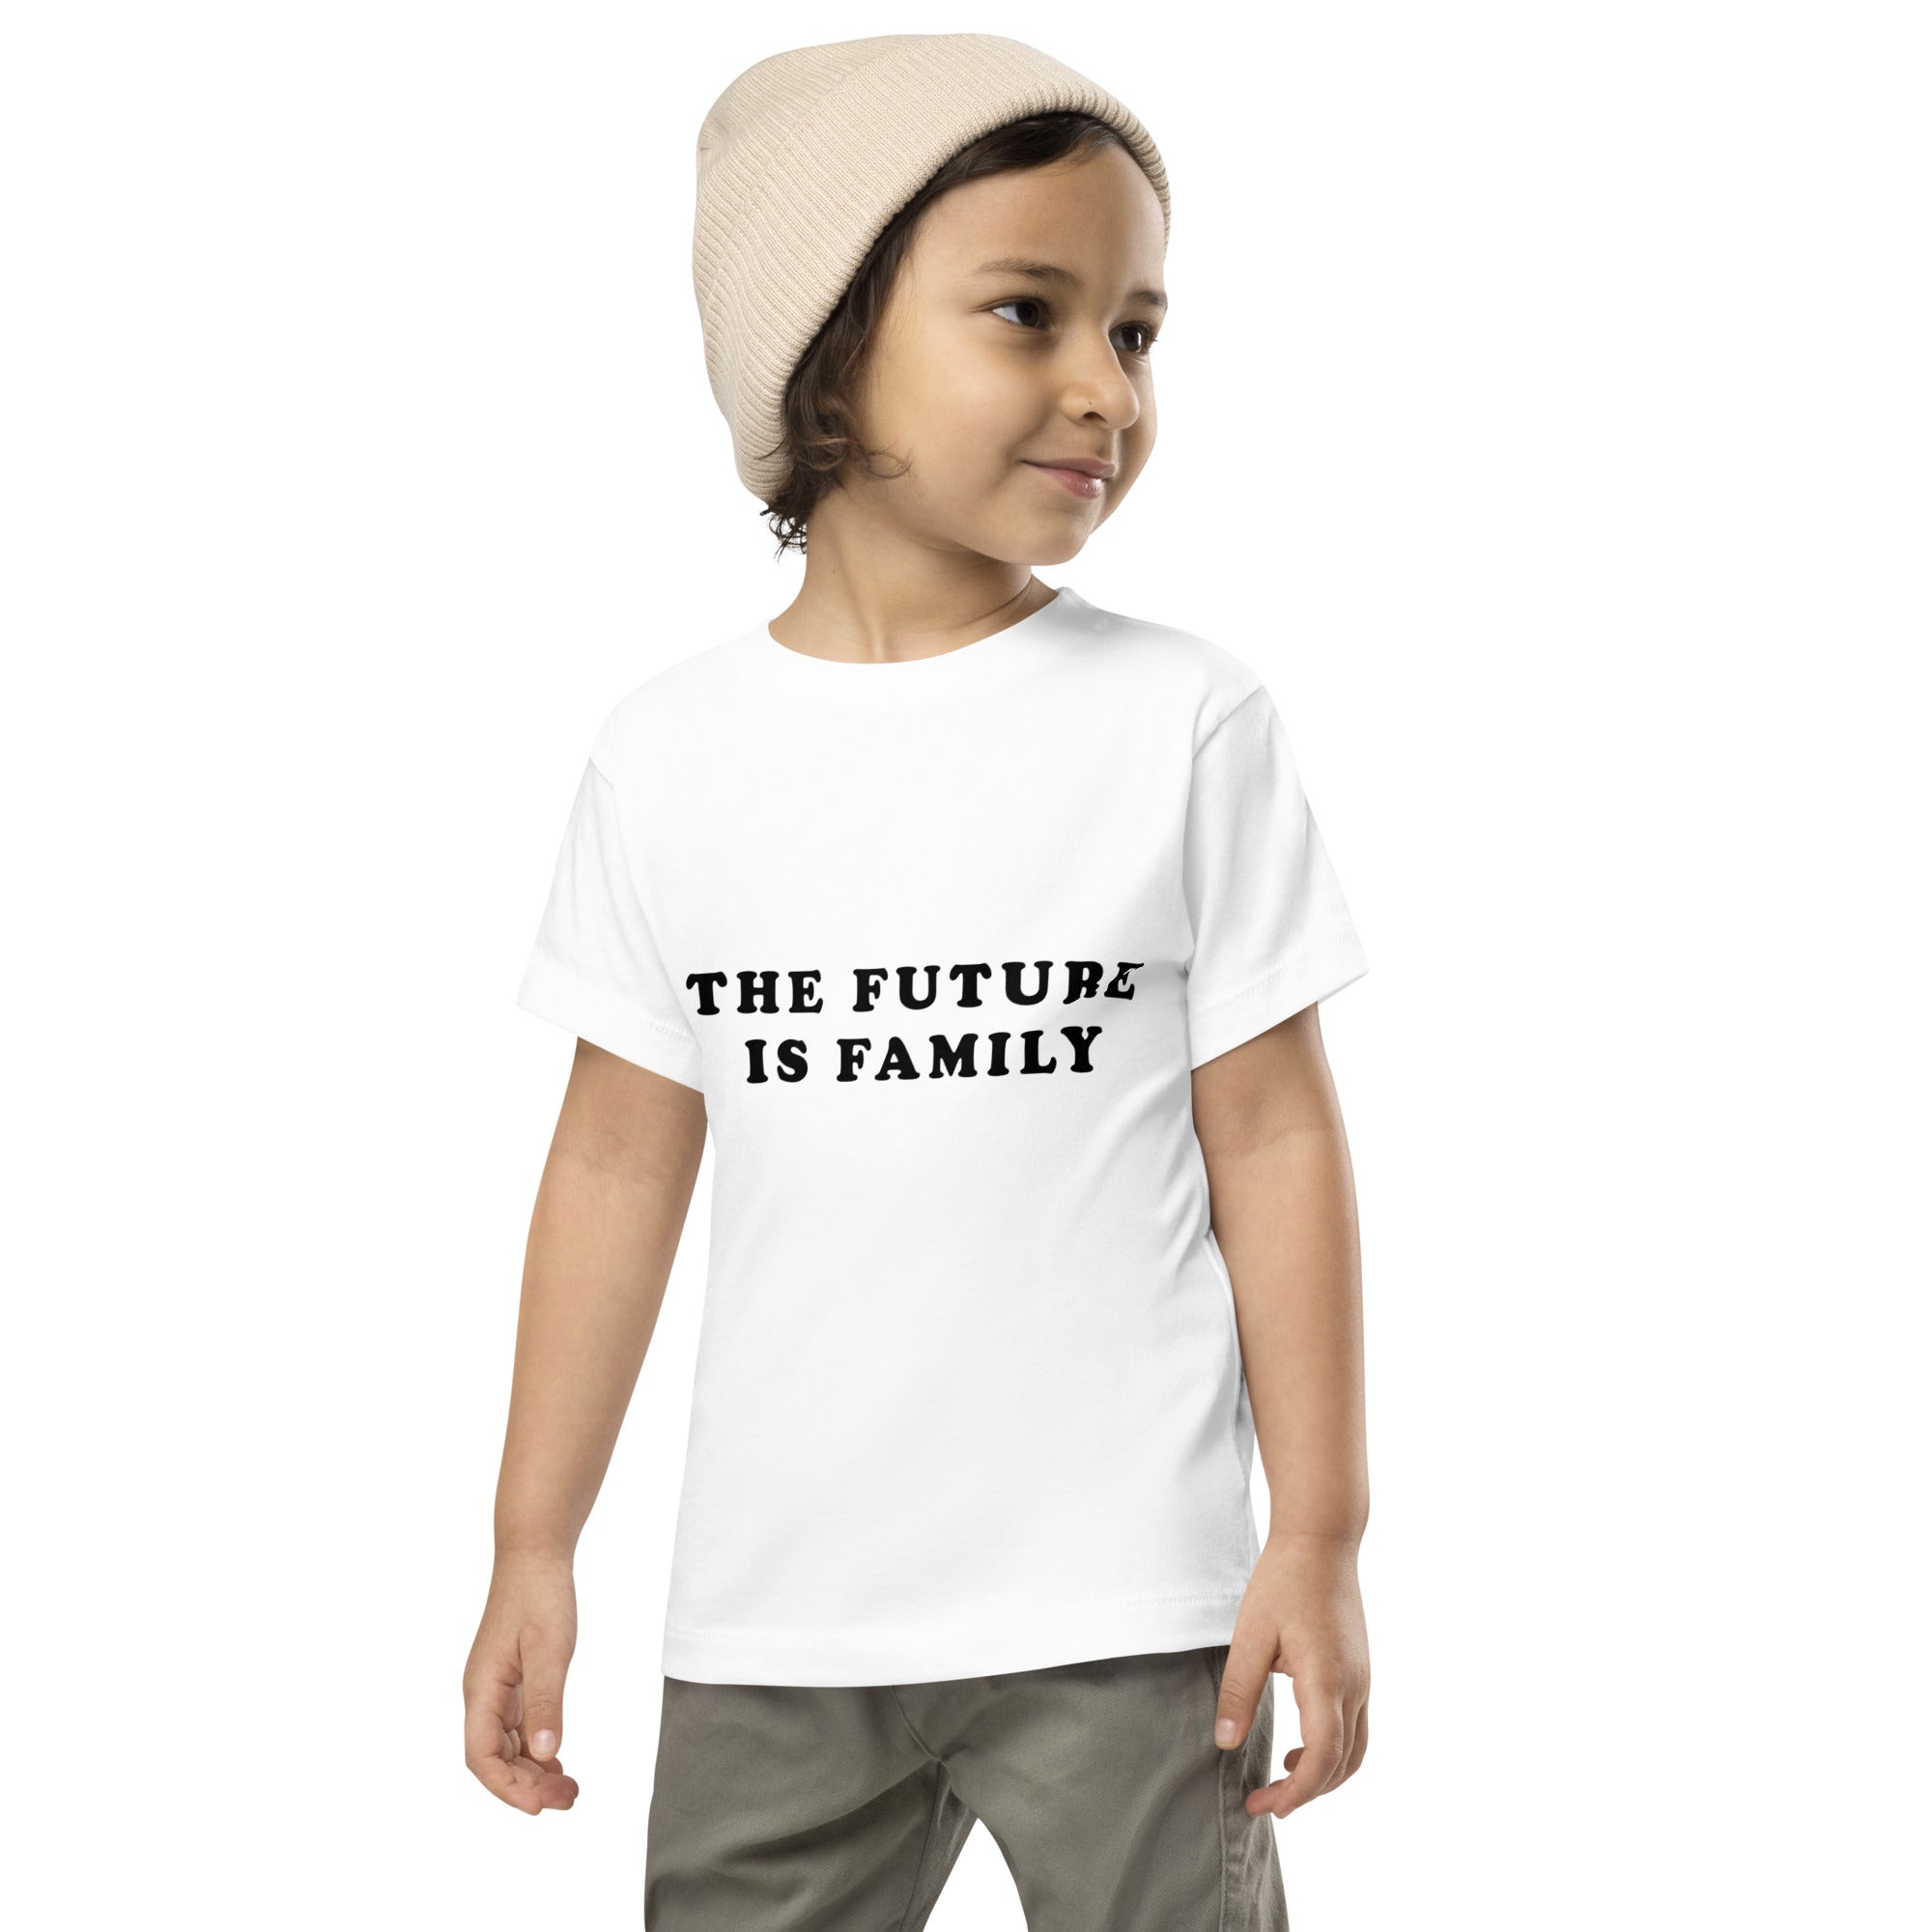 The Future Is Family Toddler Tee